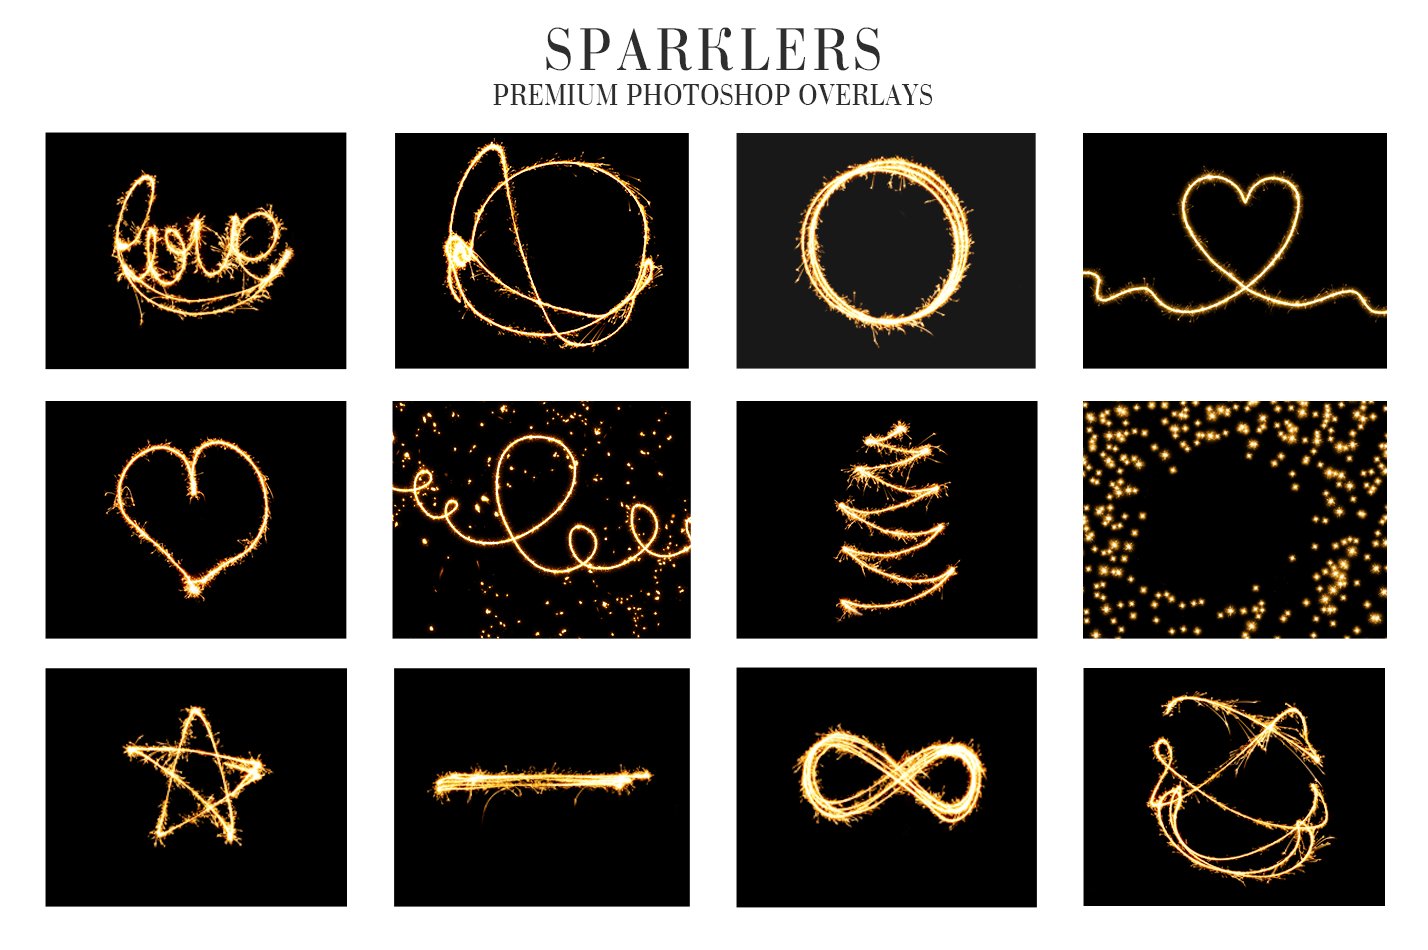 Sparklers Overlays Photoshoppreview image.